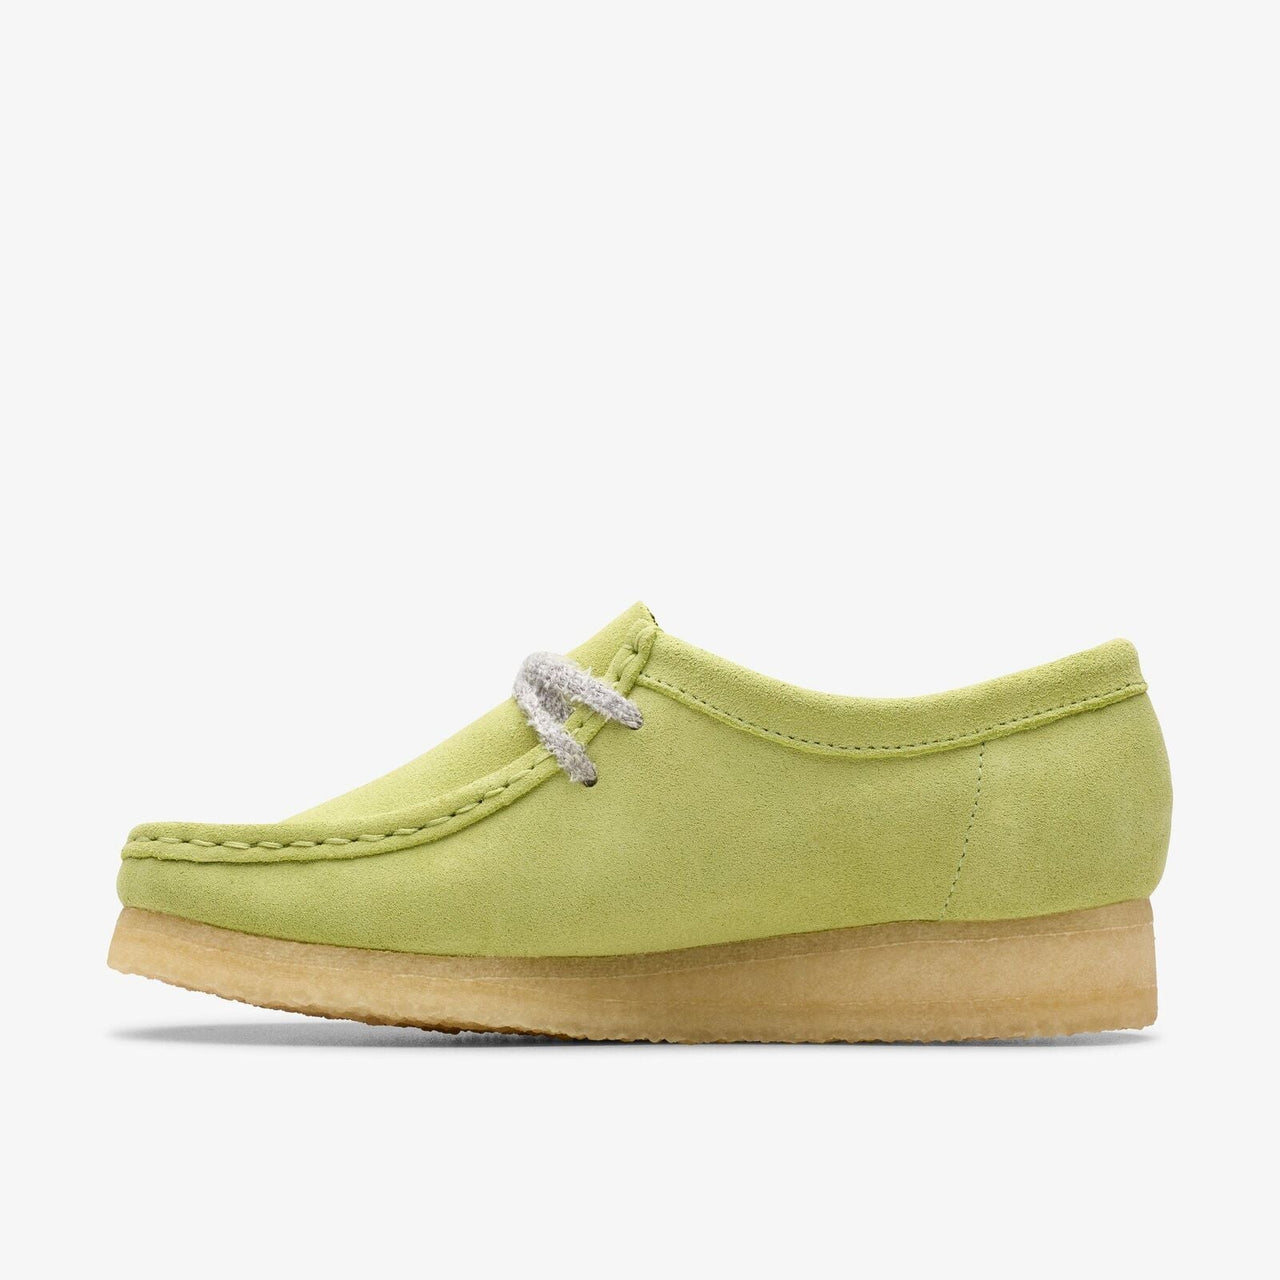 Fashionable Clarks Women Wallabee Pale Lime Suede 26175670 shoes for women